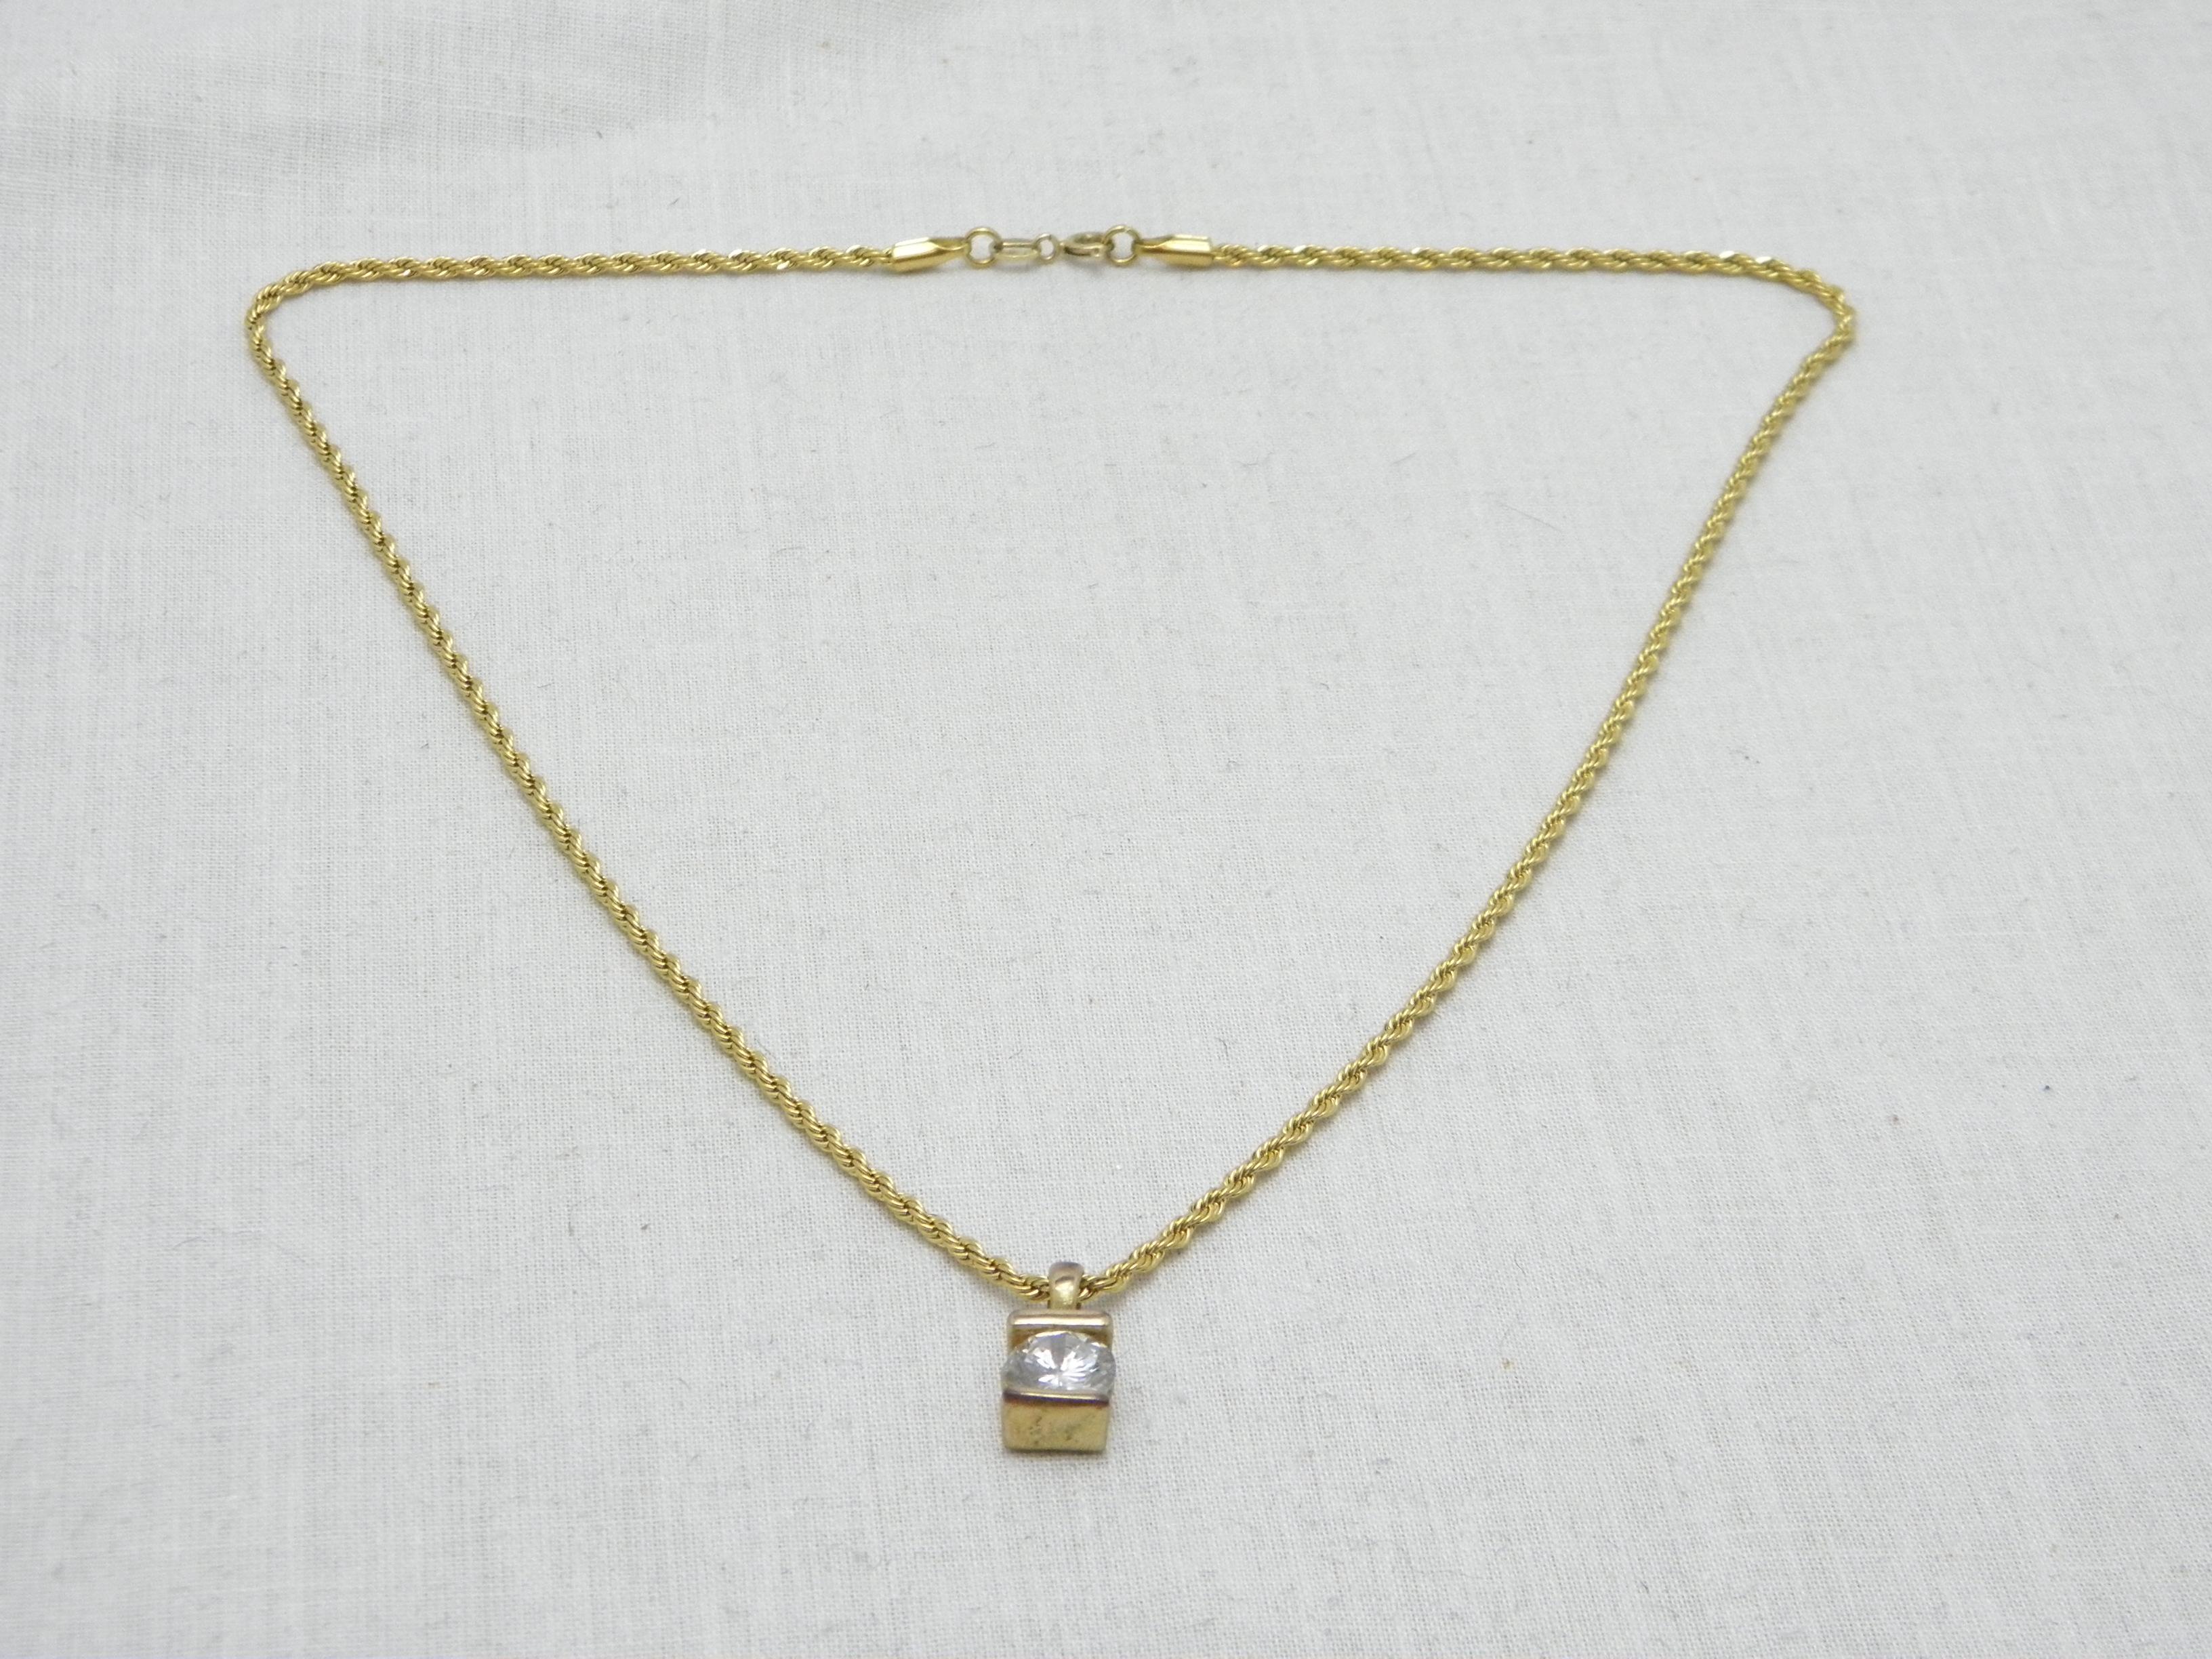 Vintage 14ct Gold Heavy Diamond Paste Pendant Necklace Rope Chain 585 18 Inch For Sale 2